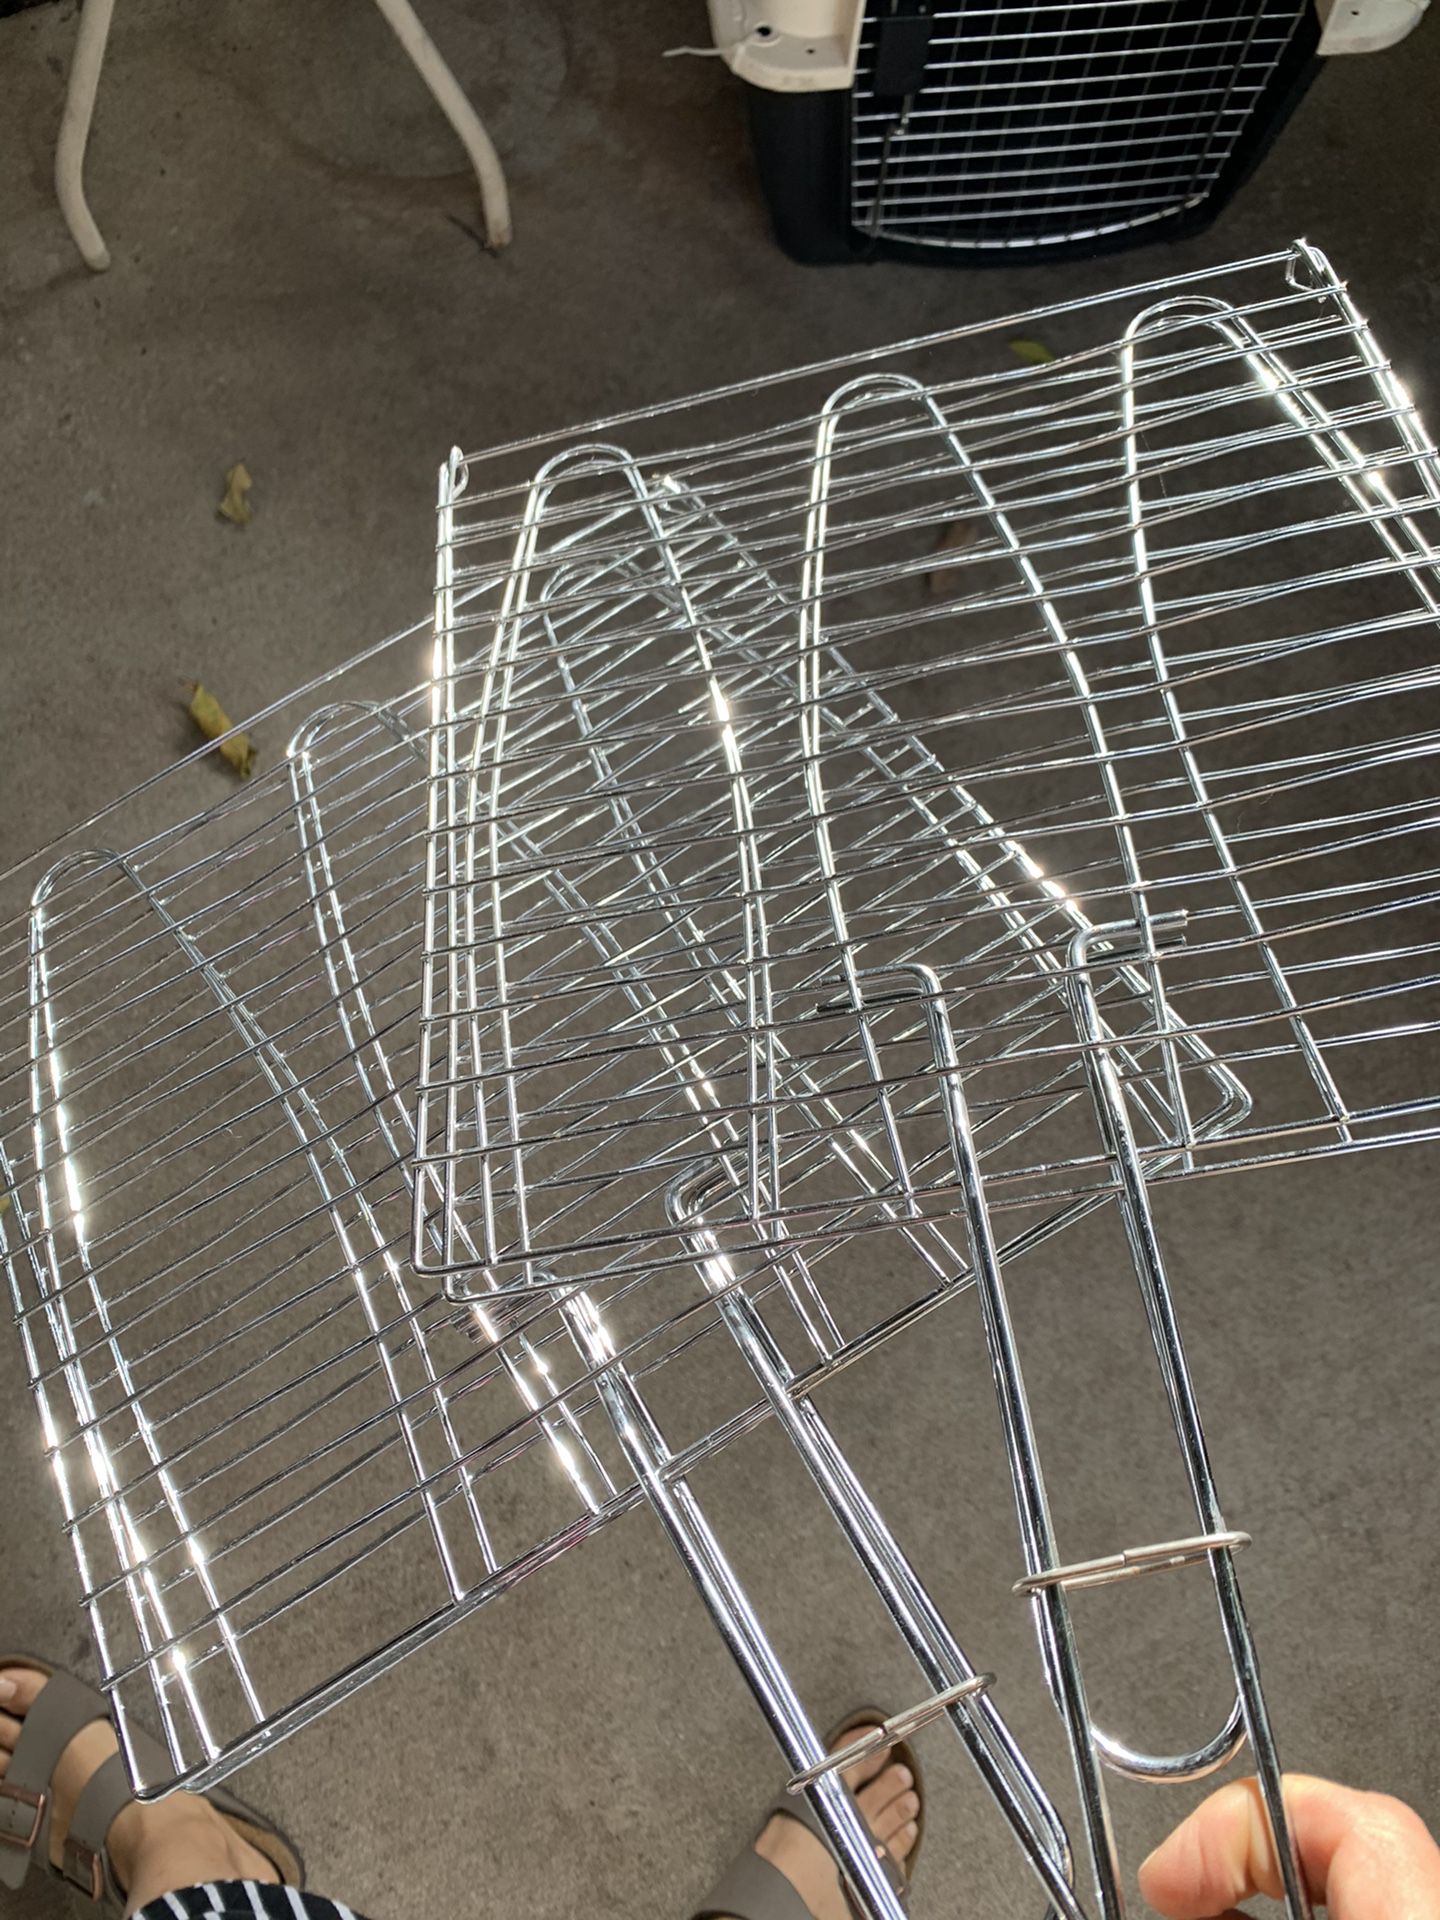 TWO BRAND NEW BBQ Grill Baskets (accessories)